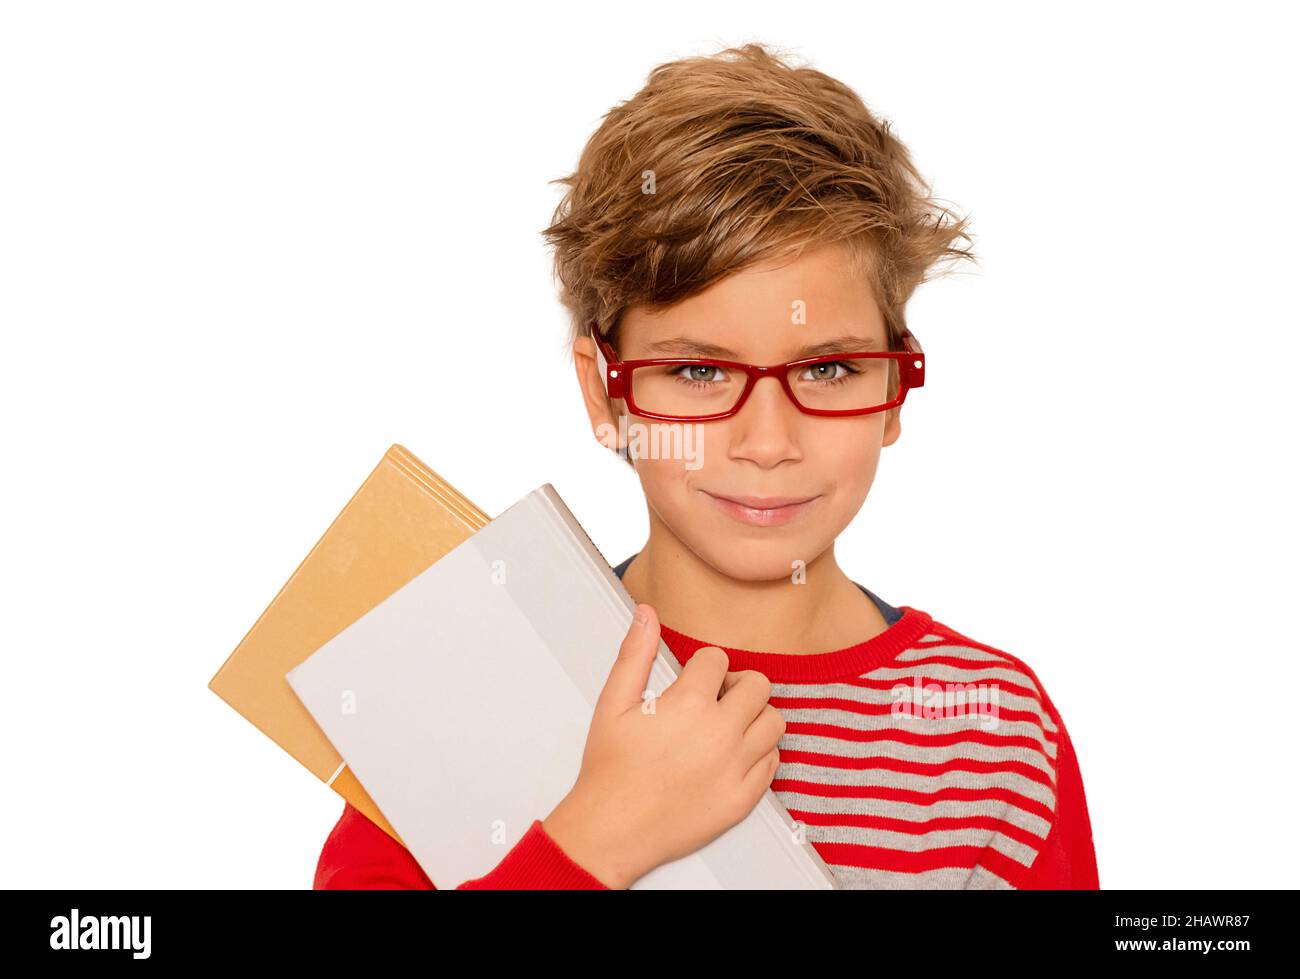 smart boy with blonde hair and glasses holds books in his hands isolated on white Stock Photo